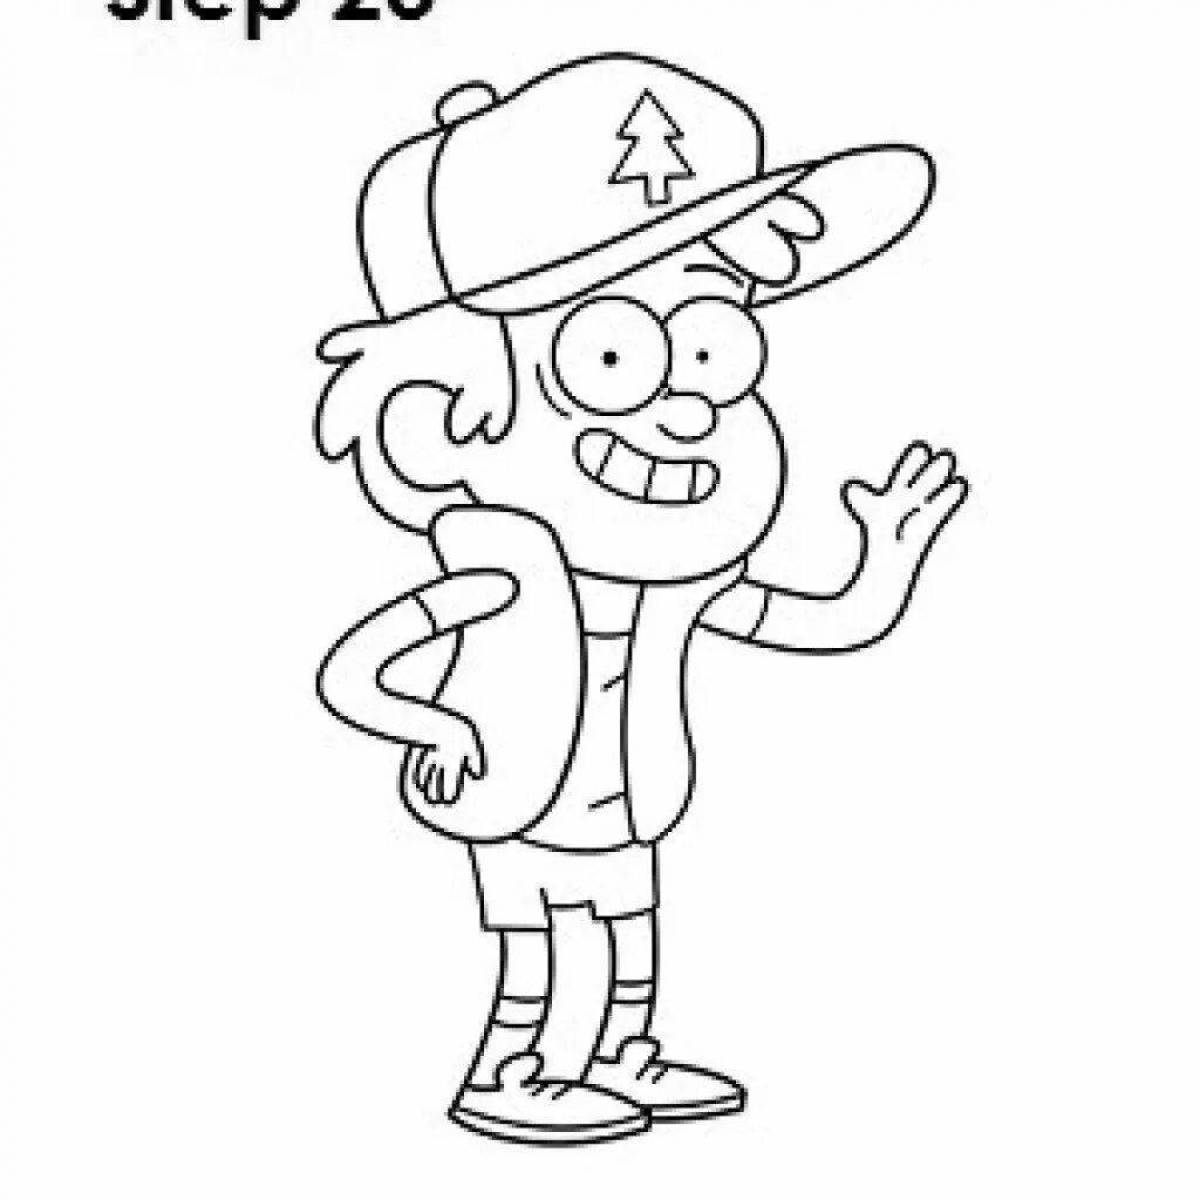 Colorful dipper pines coloring page